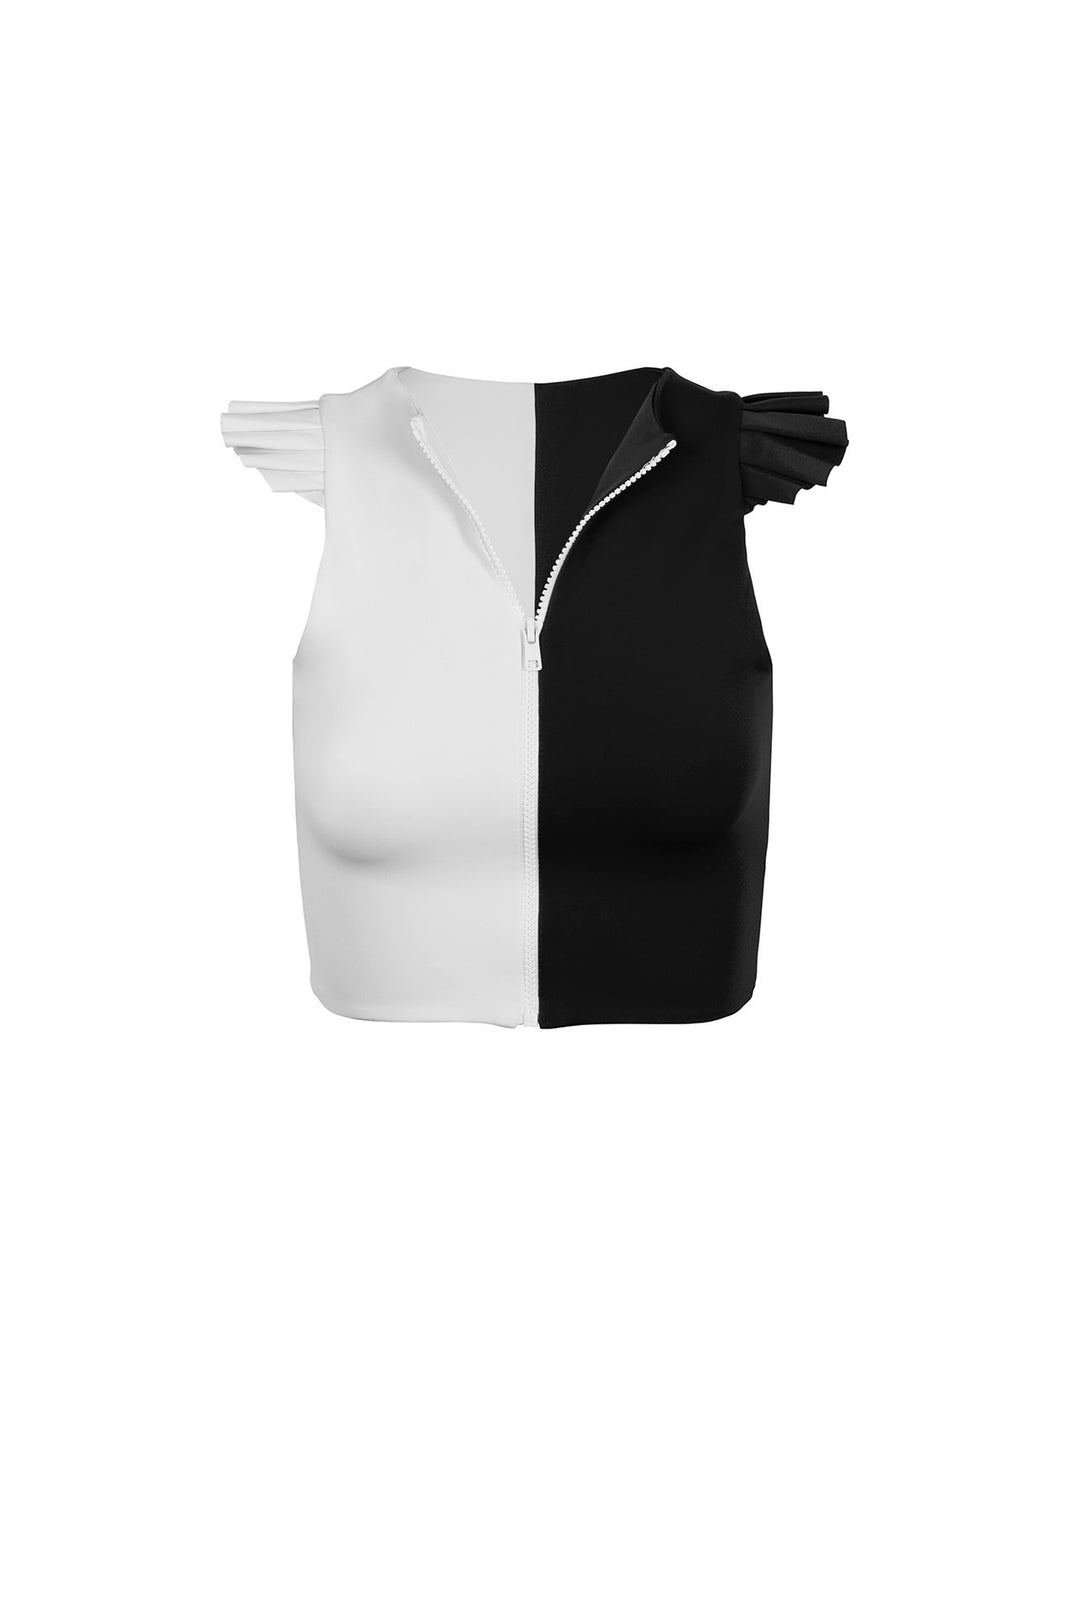 Mila Top Two-Toned Chantilly / Black